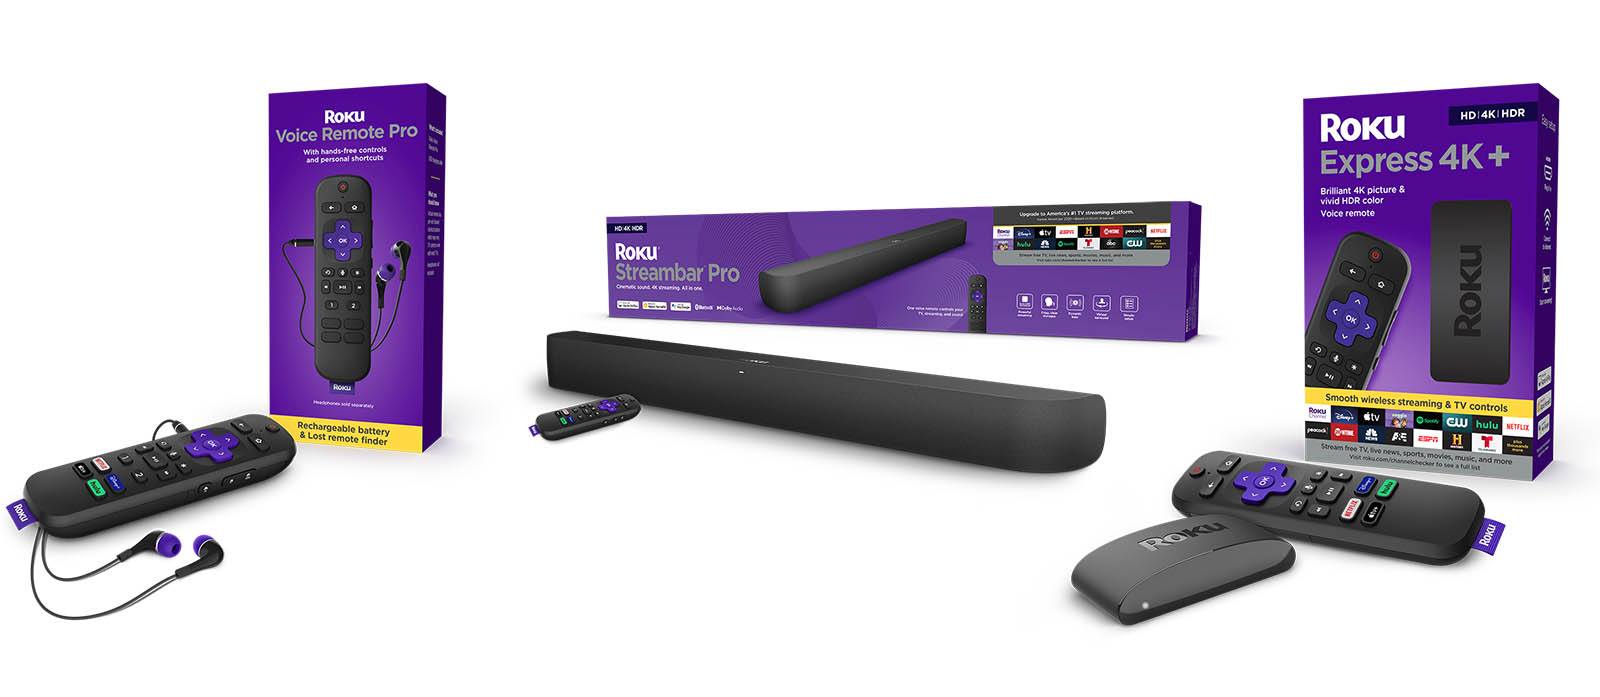 Weekend Wrap-Up: Roku’s Big News, More Apple TV Rumors, and More